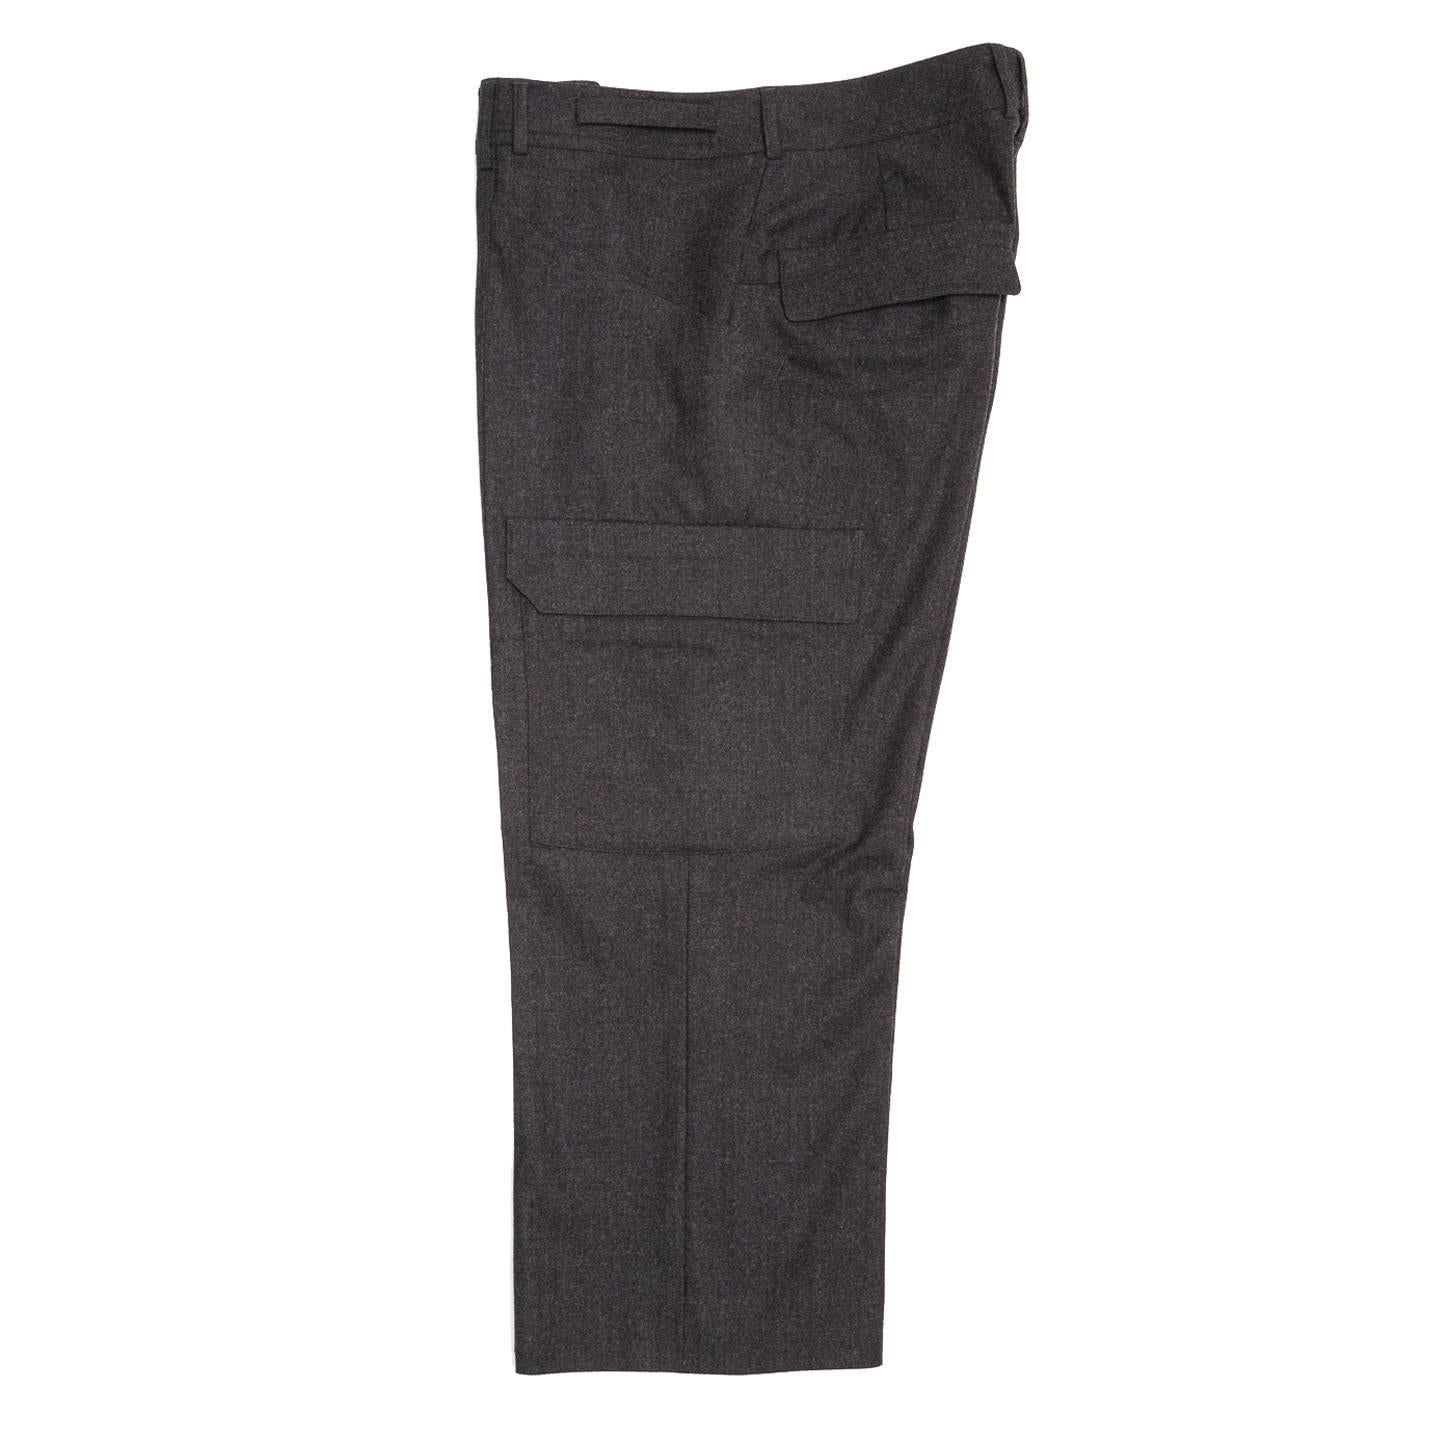 Jil Sander Grey Wool Cargo Style Pants In Excellent Condition For Sale In Brooklyn, NY